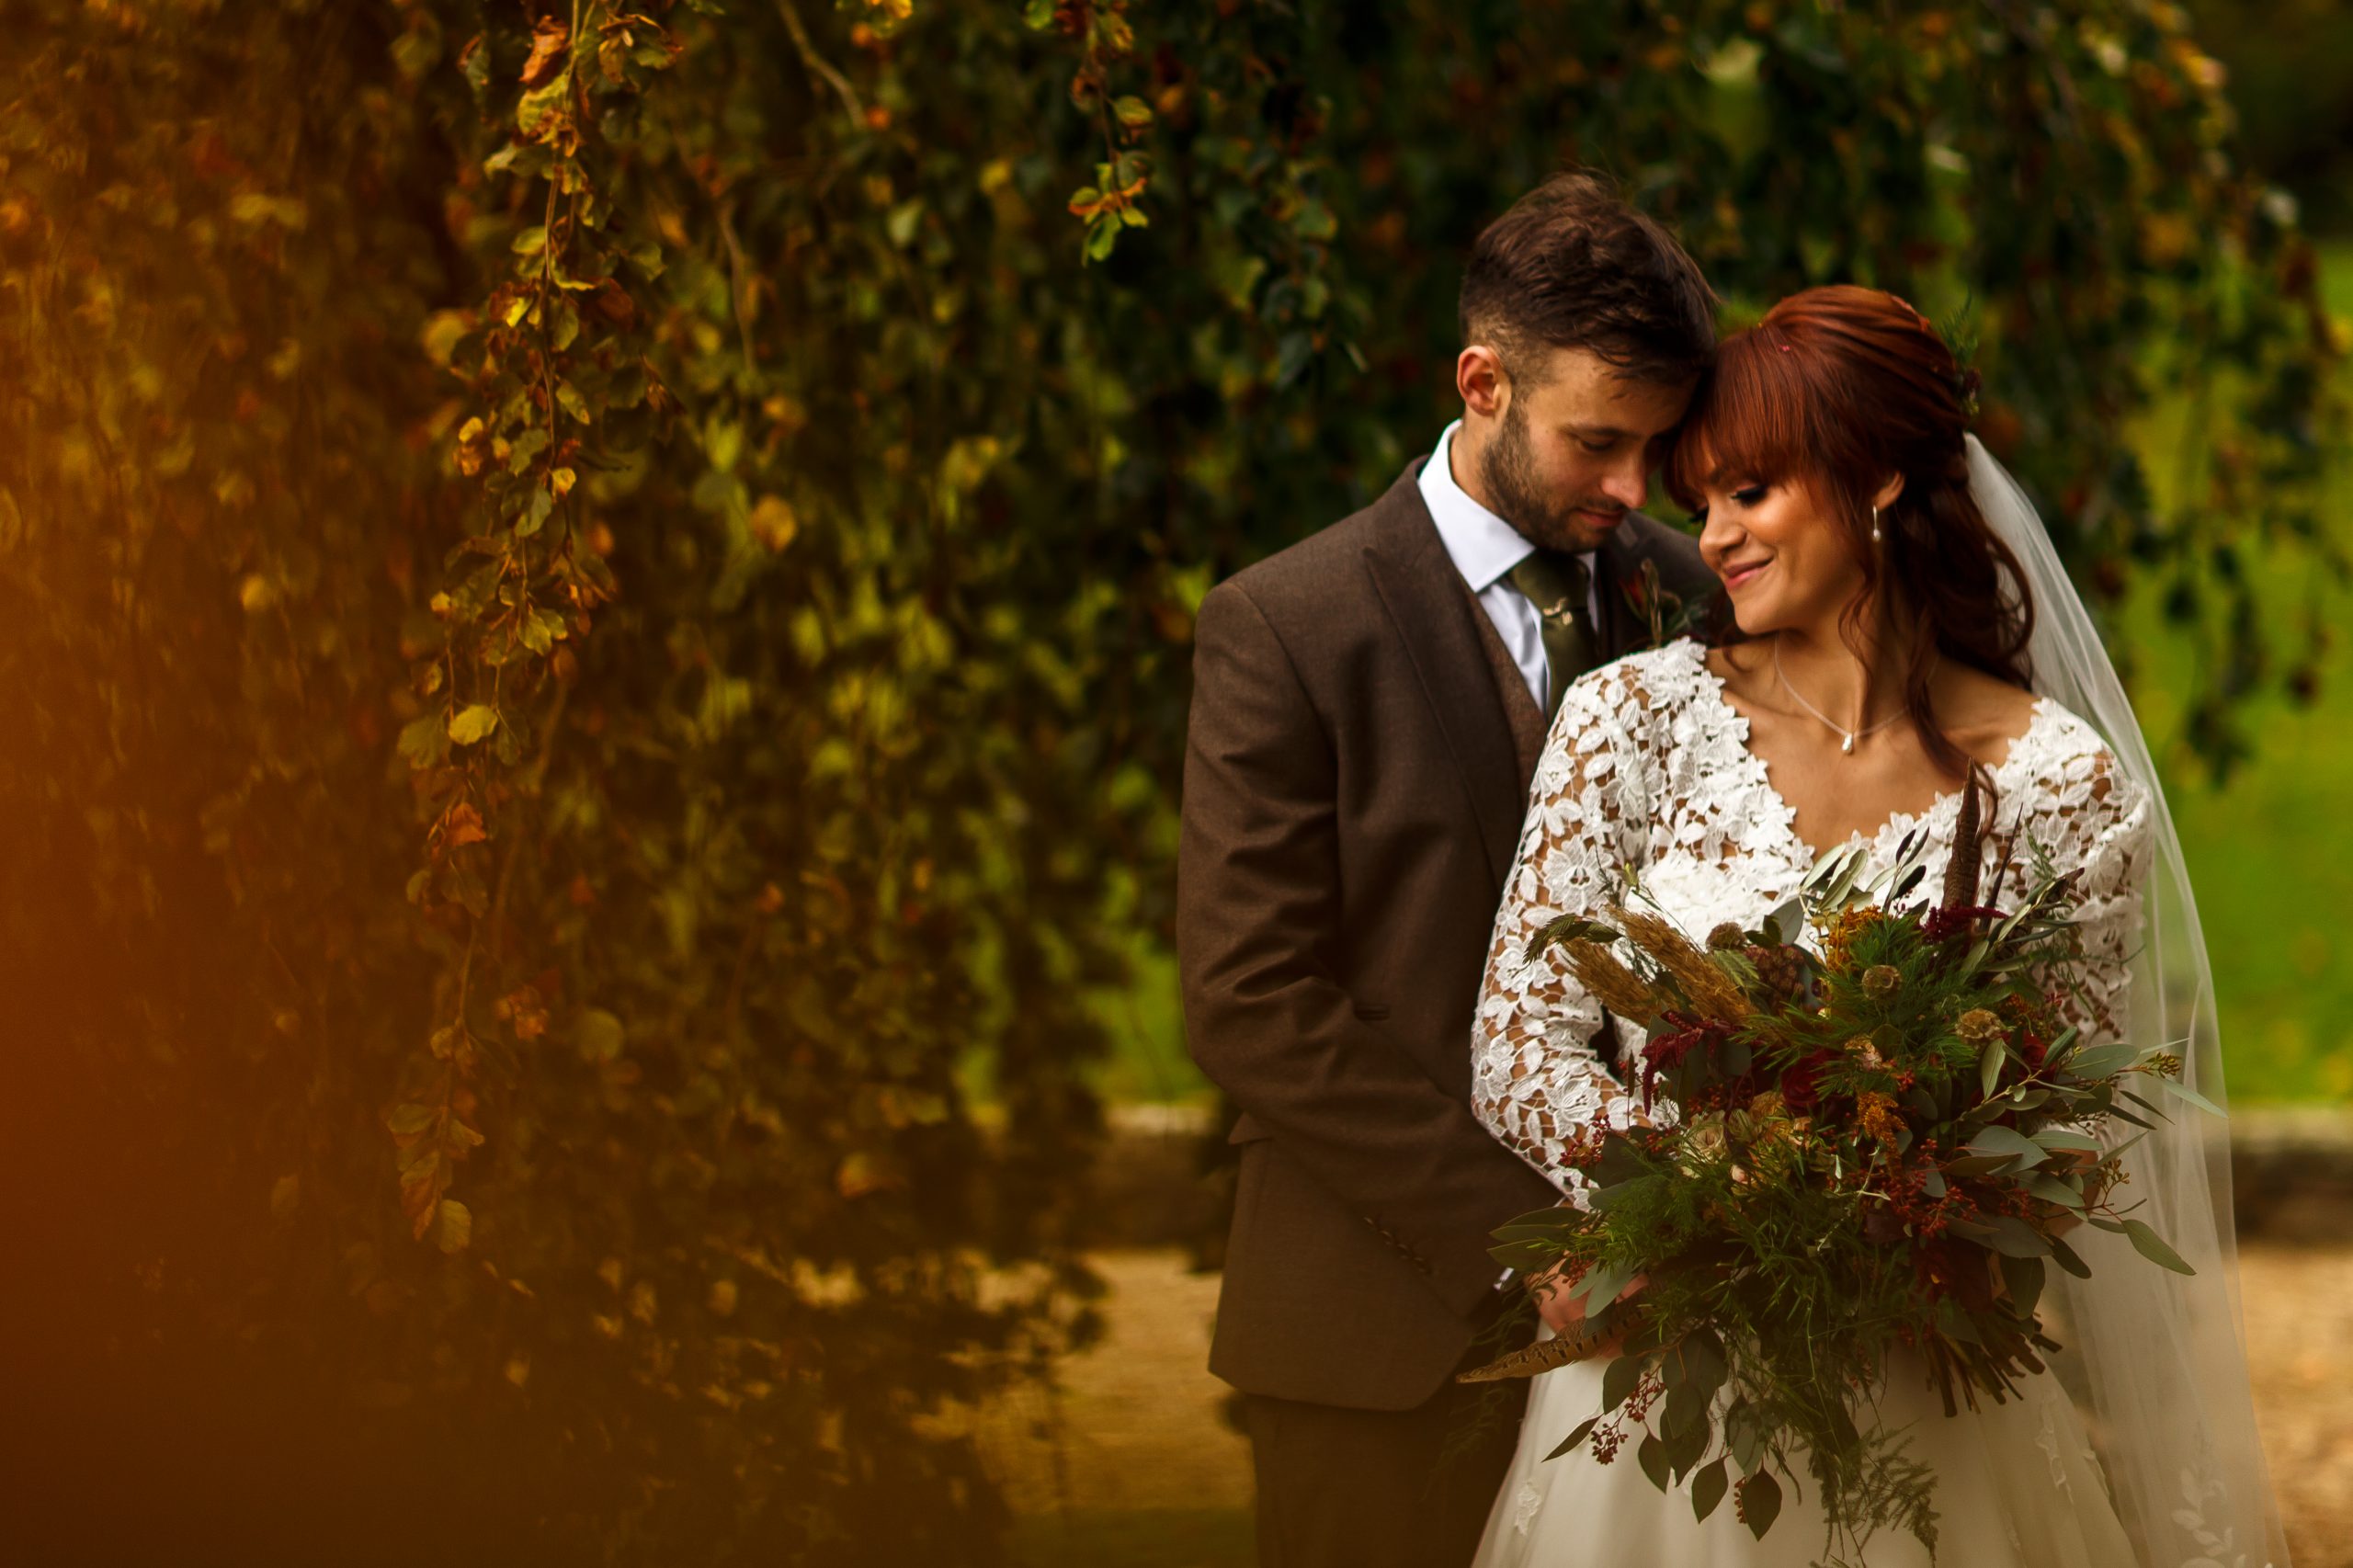 Red haired bride wearing long sleeves snuggled up to her groom